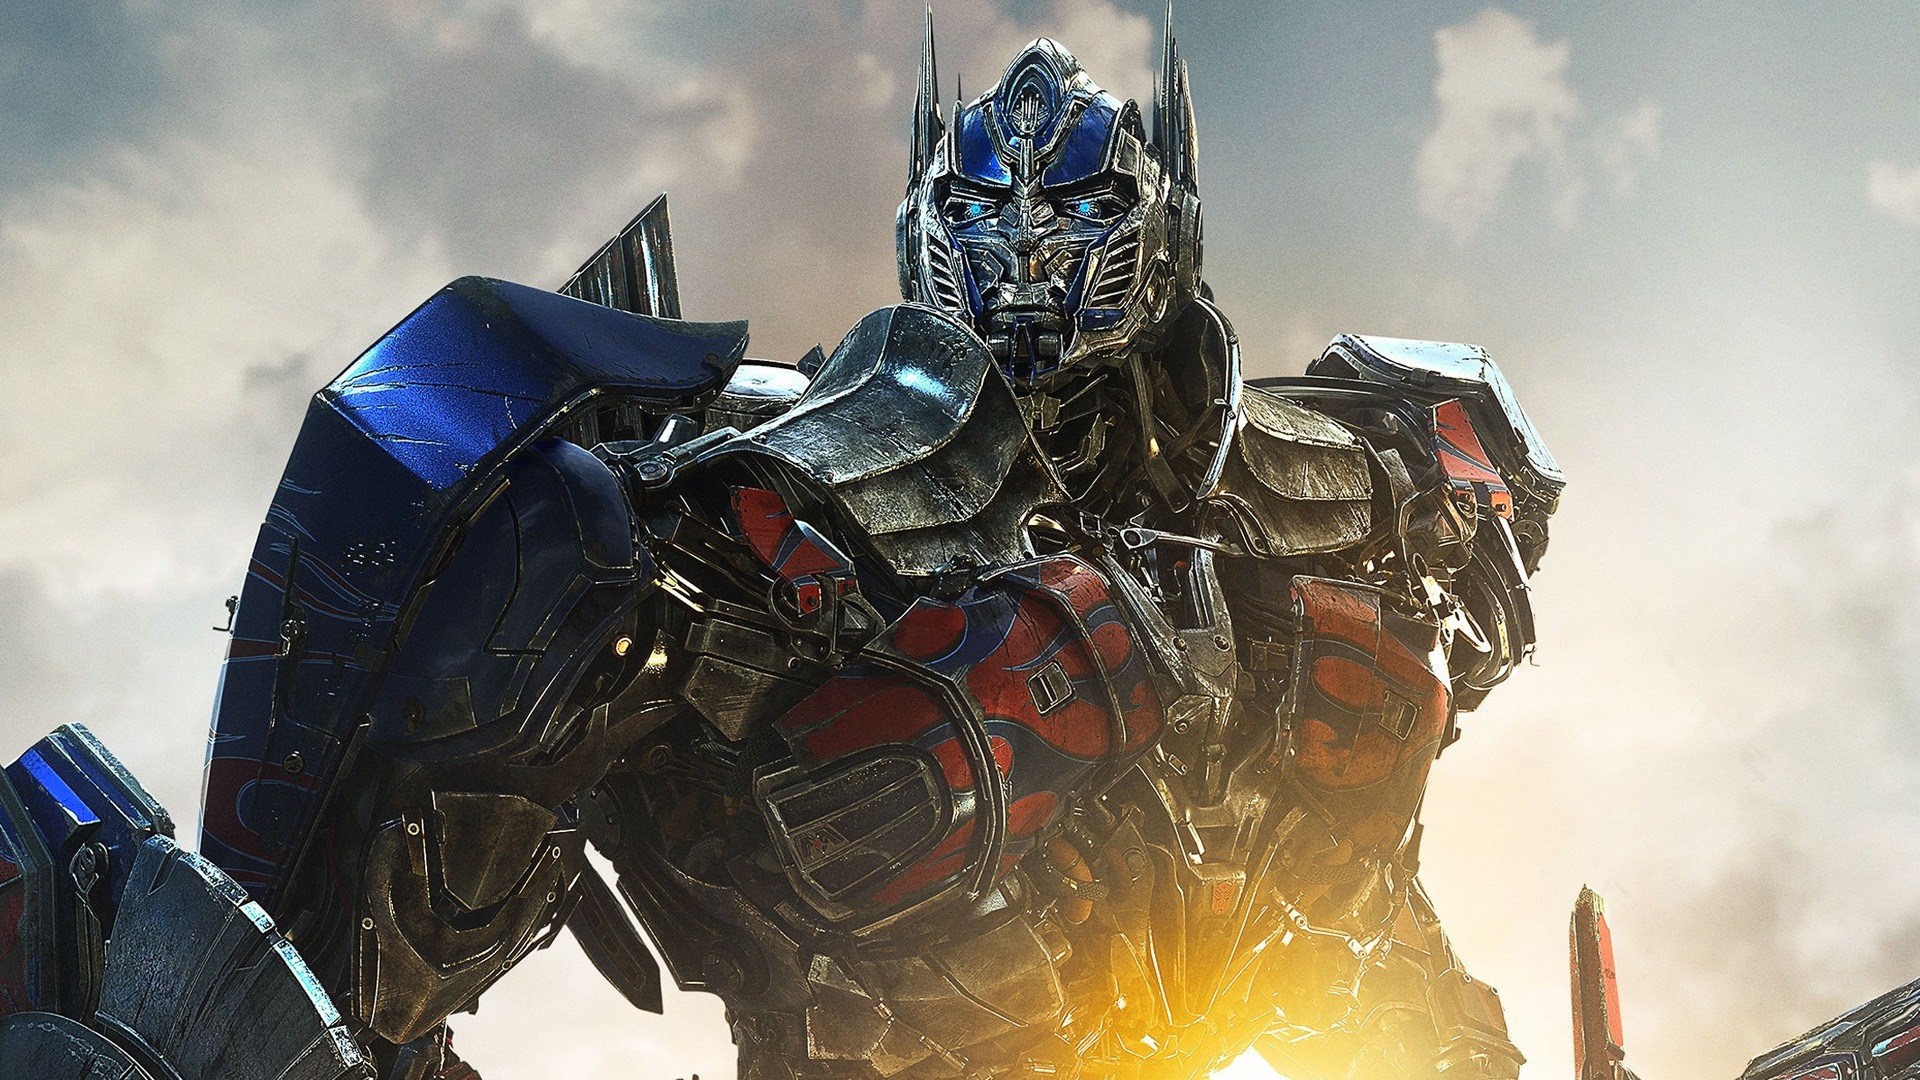 2014 Transformers: Age of Extinction HD wallpapers #2 - 1920x1080